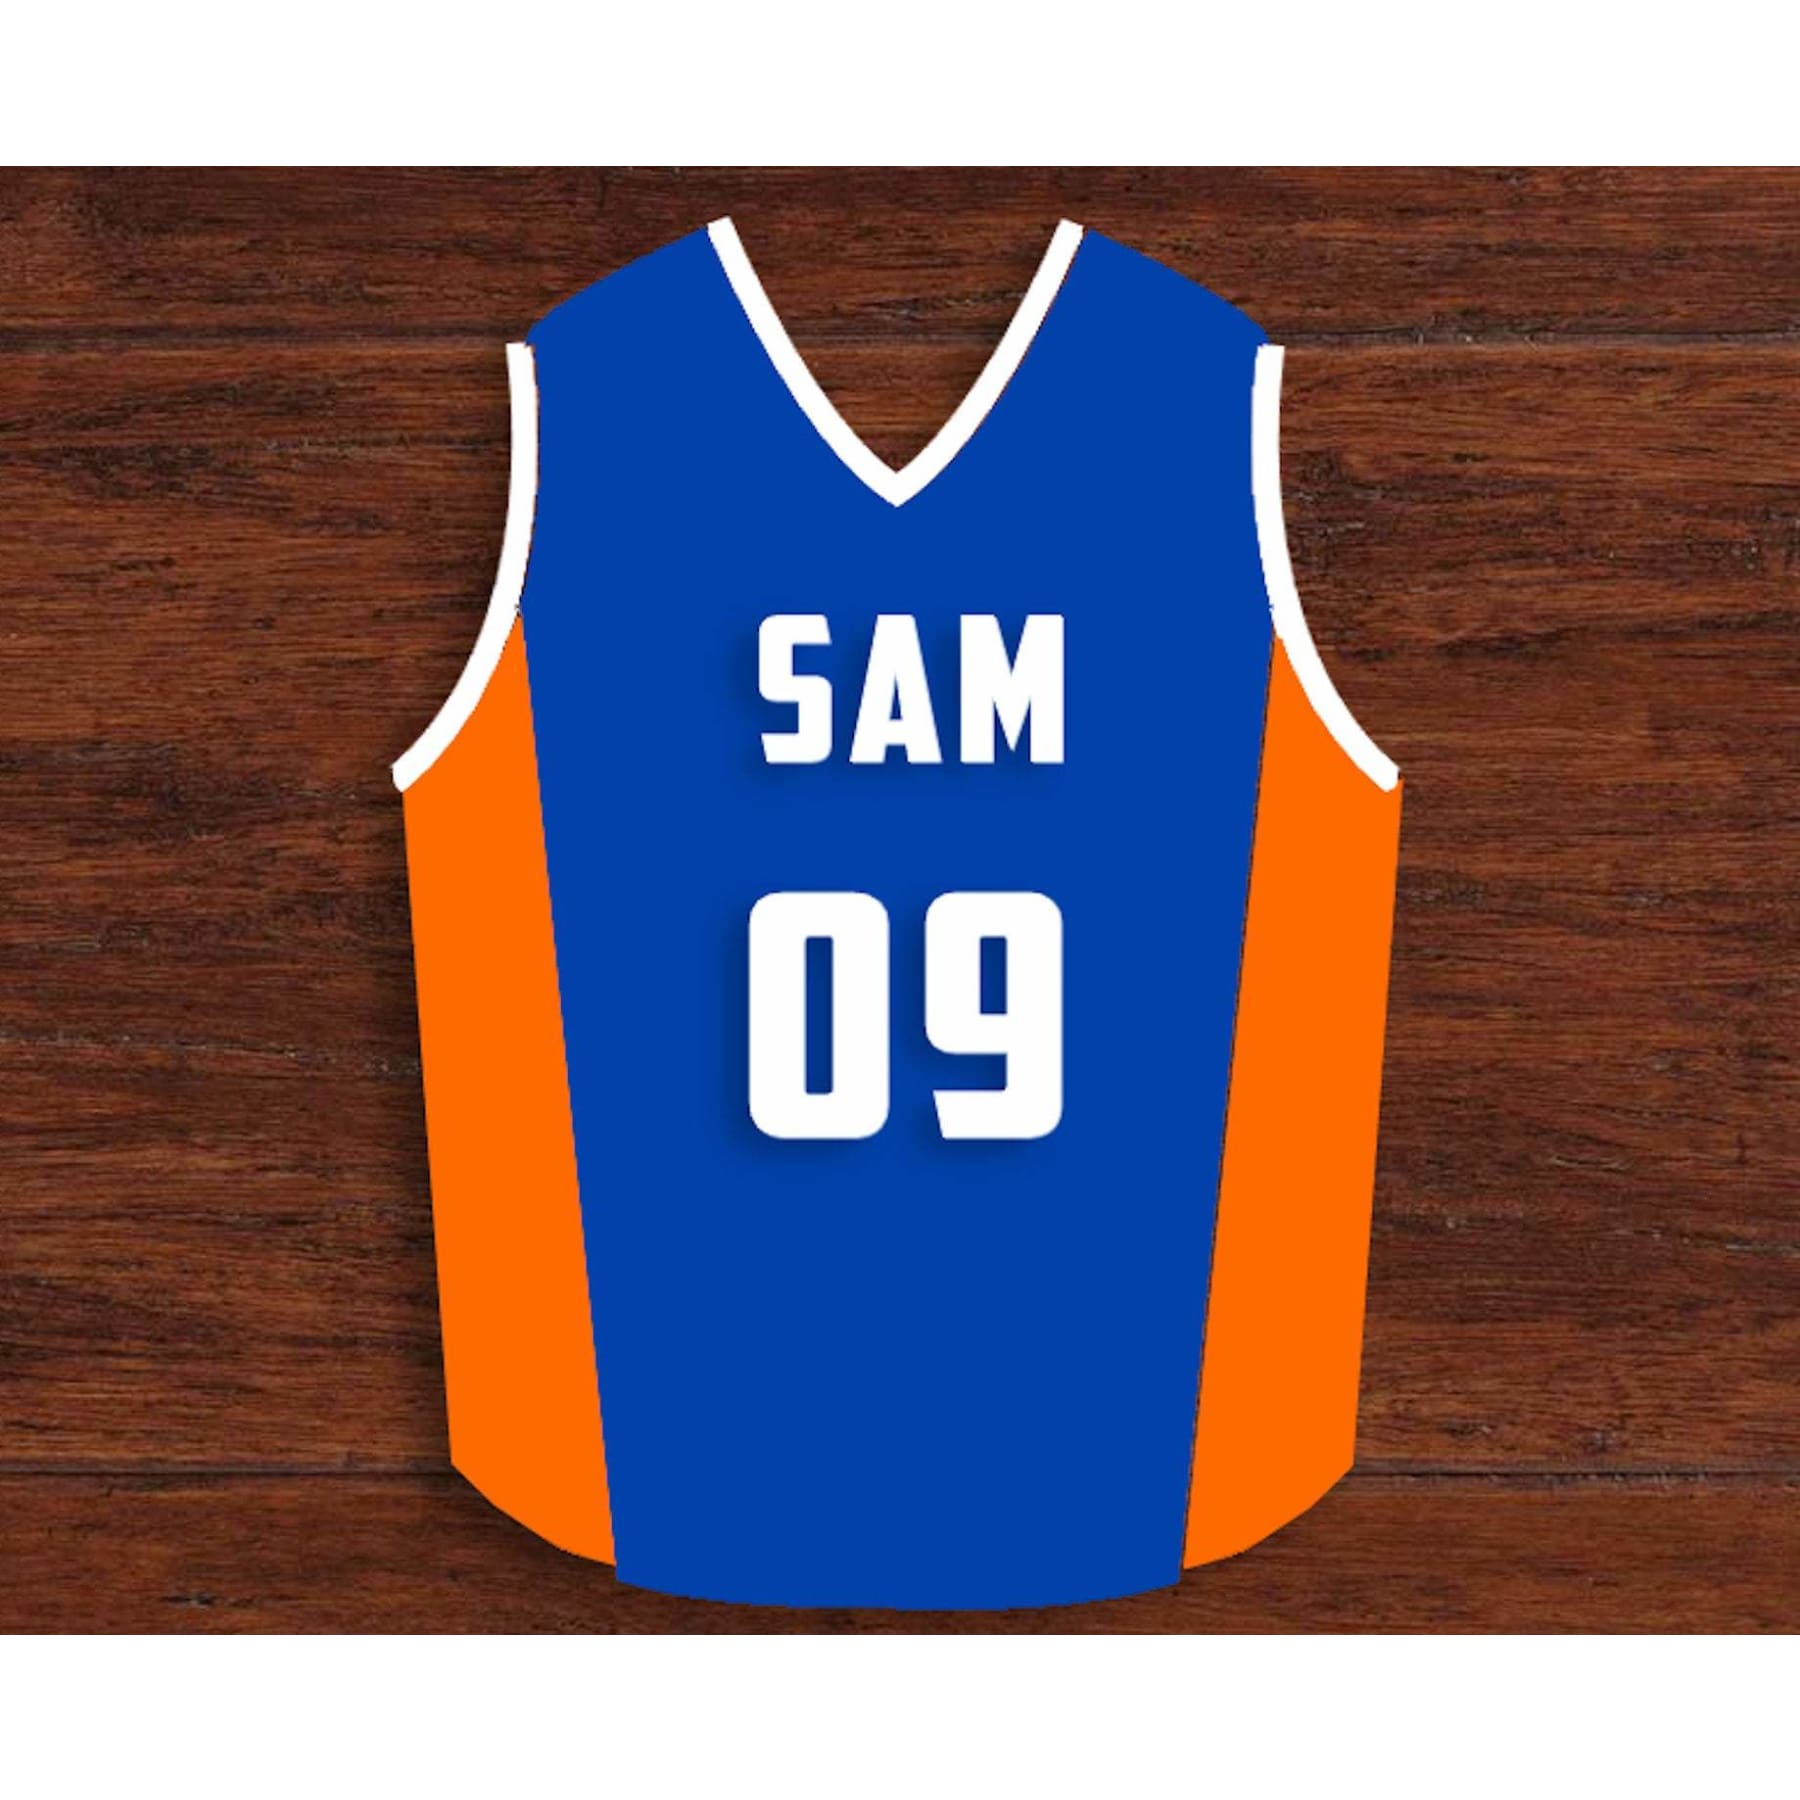 Basketball Jersey Wall Decor, any color with custom name and number, NBL, NCAA or Local teams